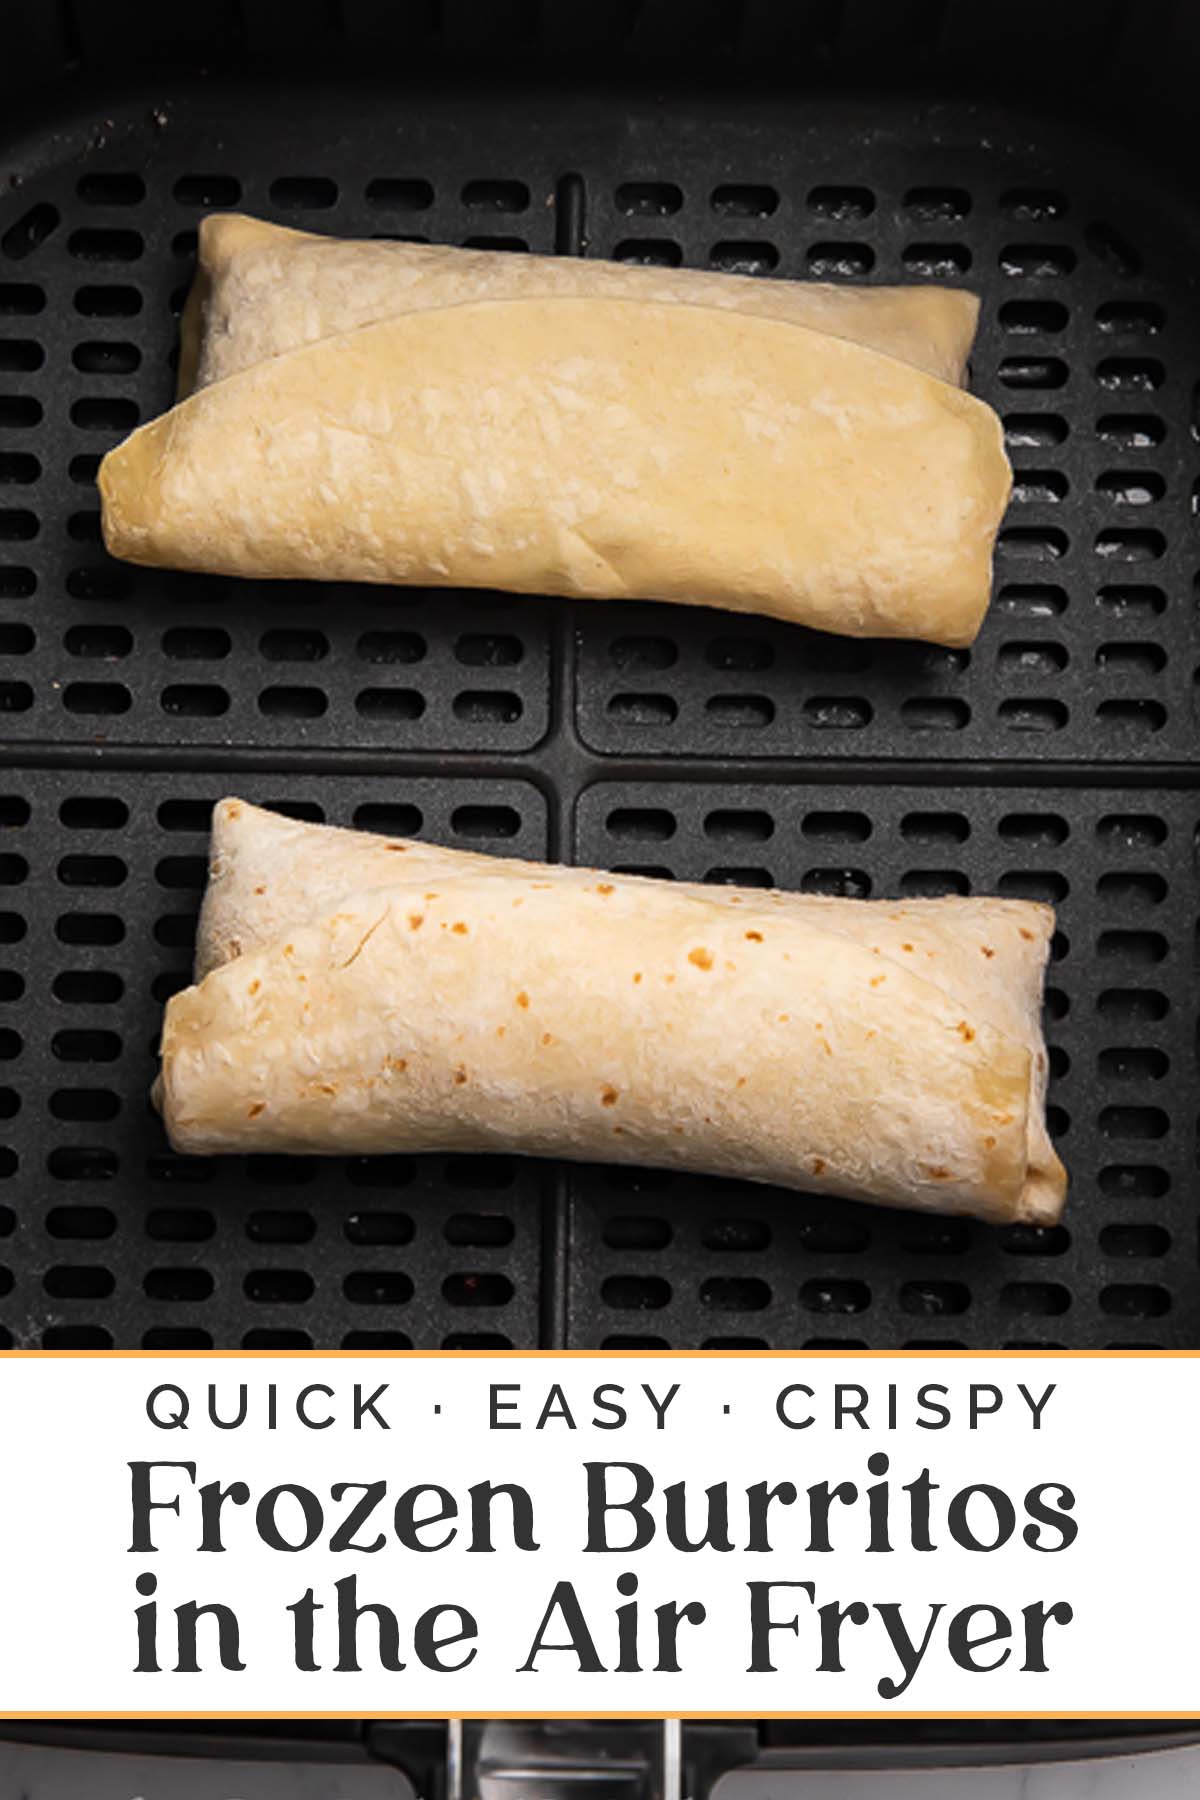 Pin graphic for frozen burritos in the air fryer.